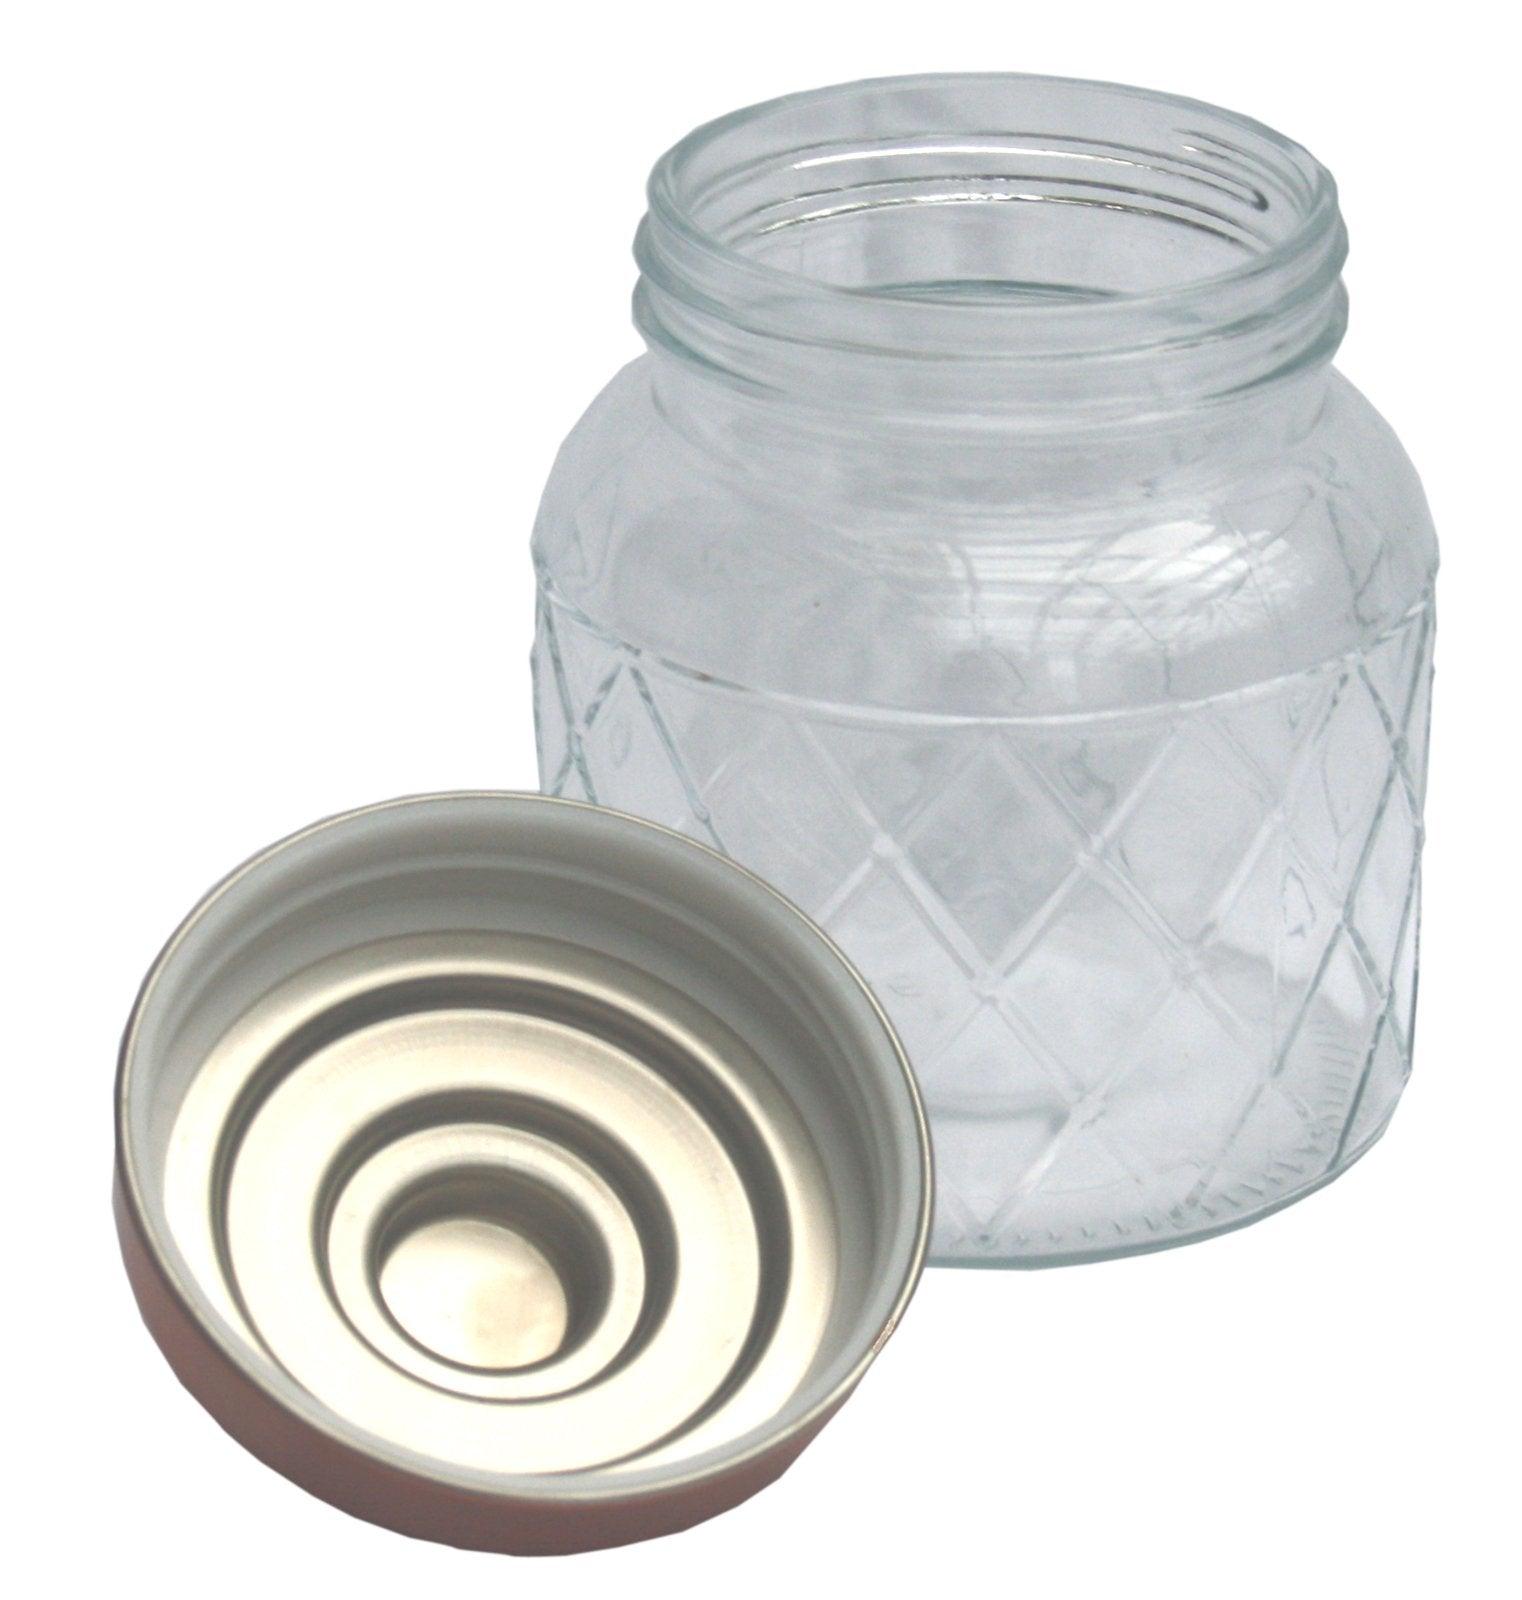 View Round Glass Jar With Copper Lid 55 Inch information